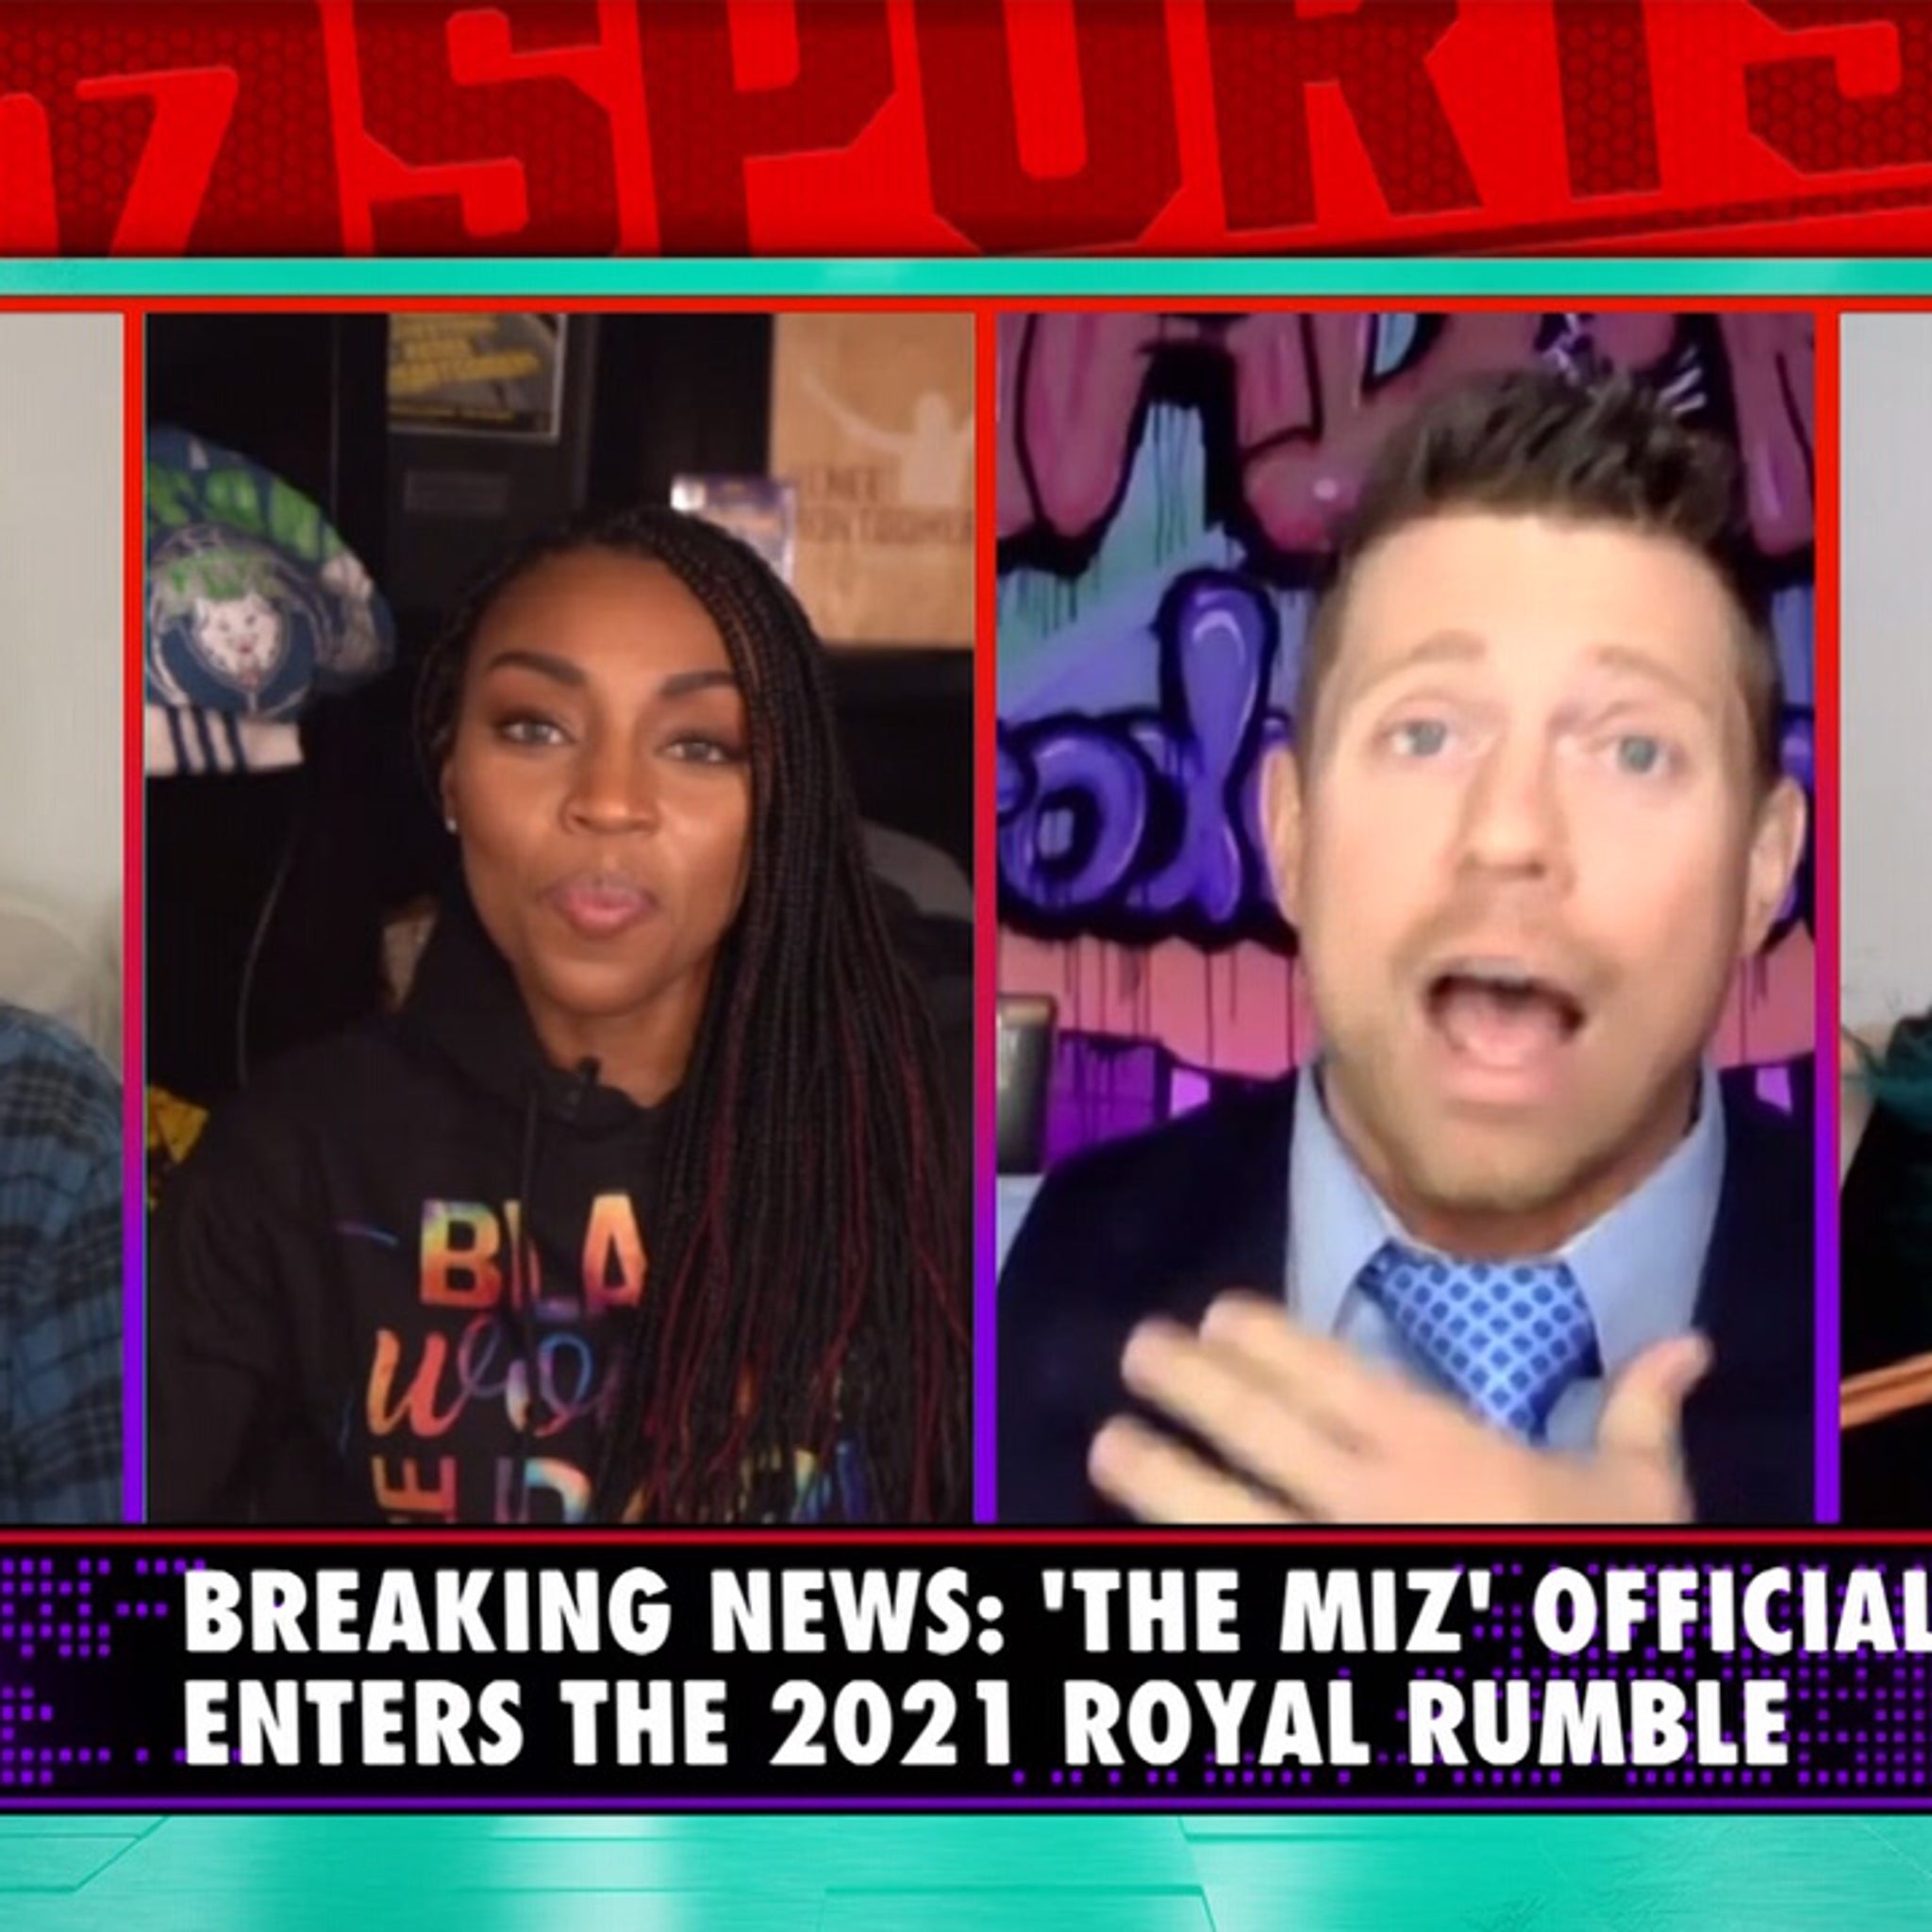 WWE Superstar The Miz Says Hes Wrestling In Royal Rumble!! pic